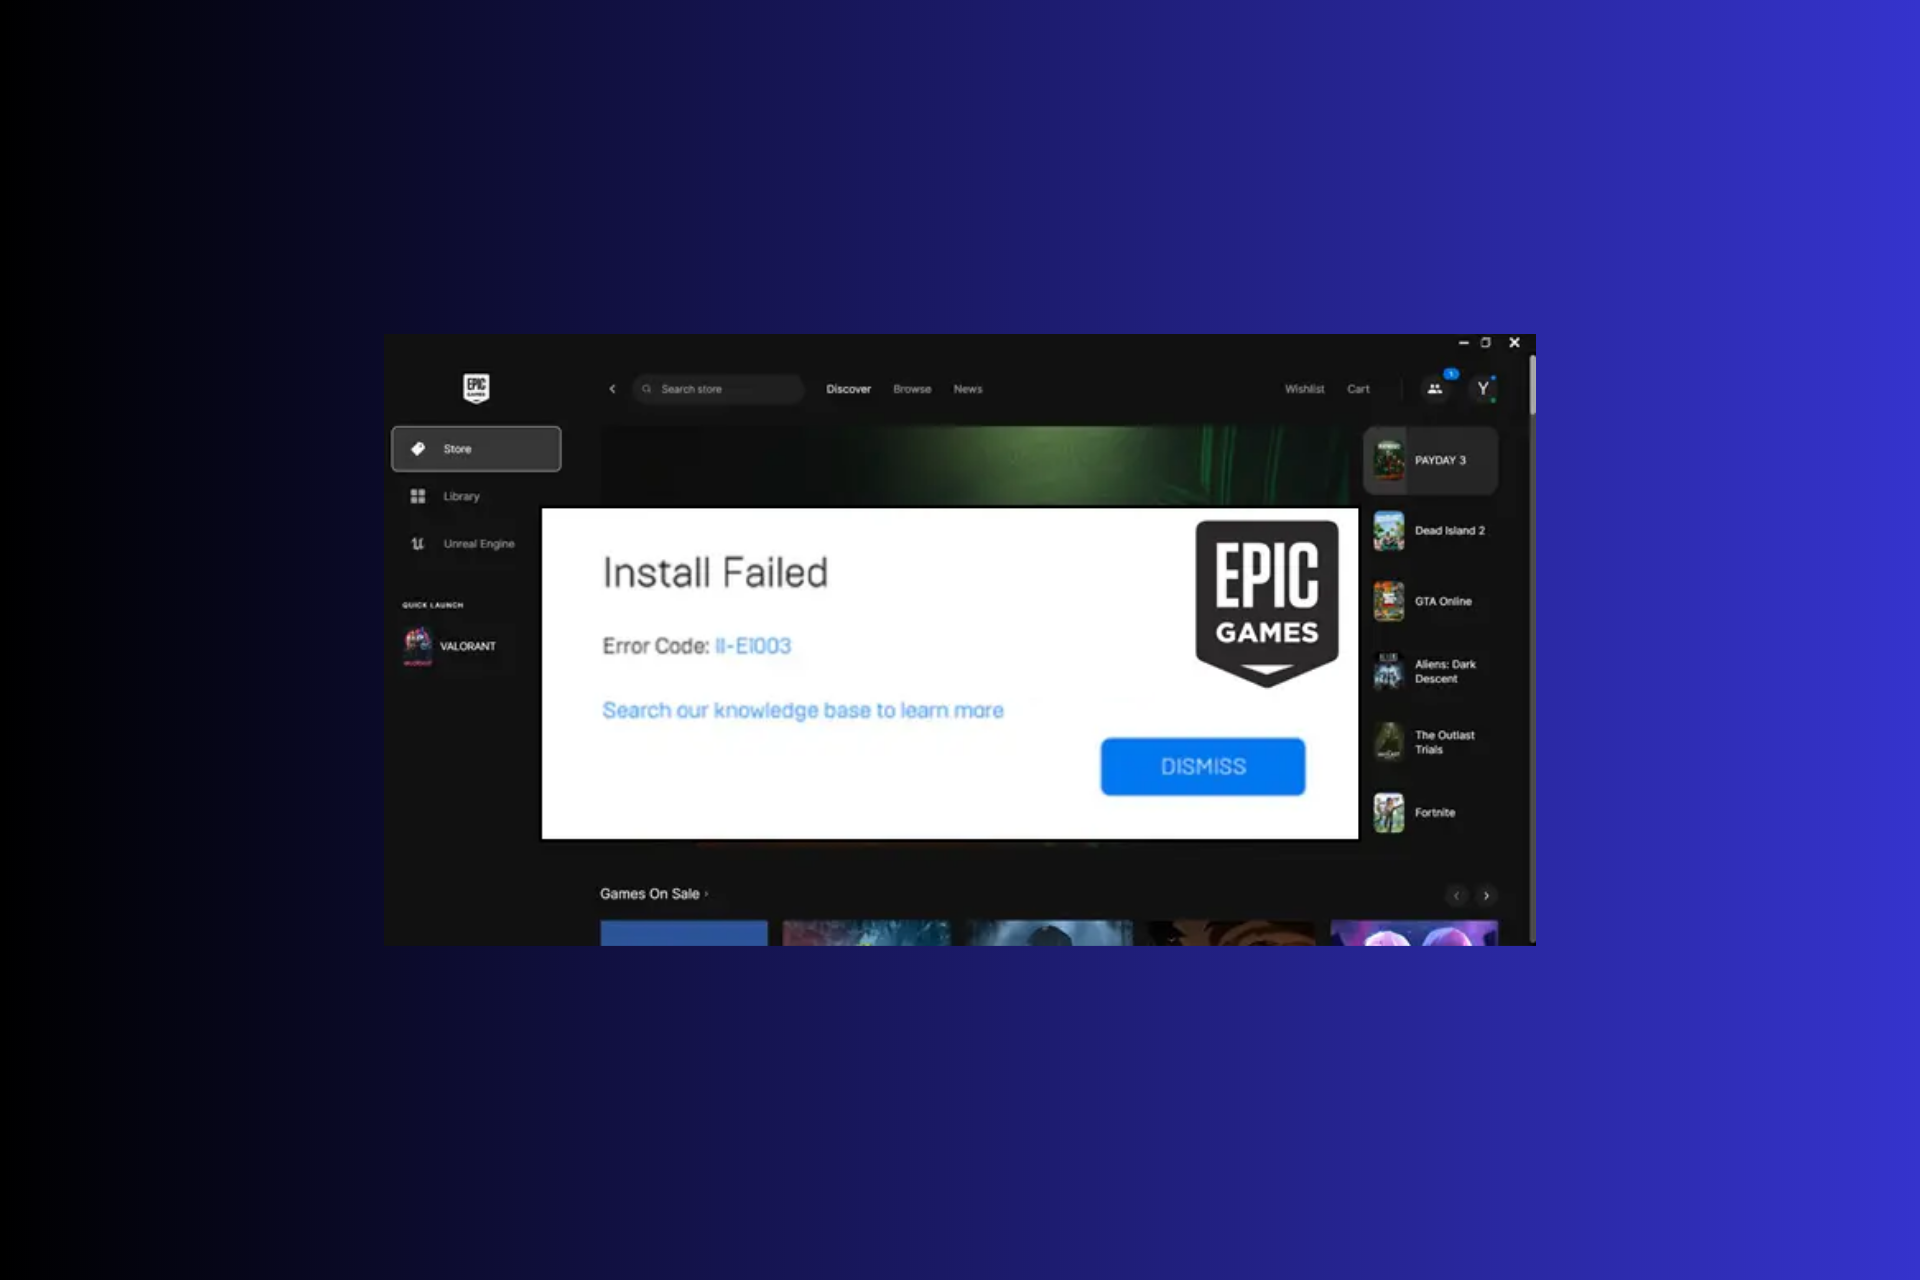 How to Fix the Epic games Launcher Connection Error